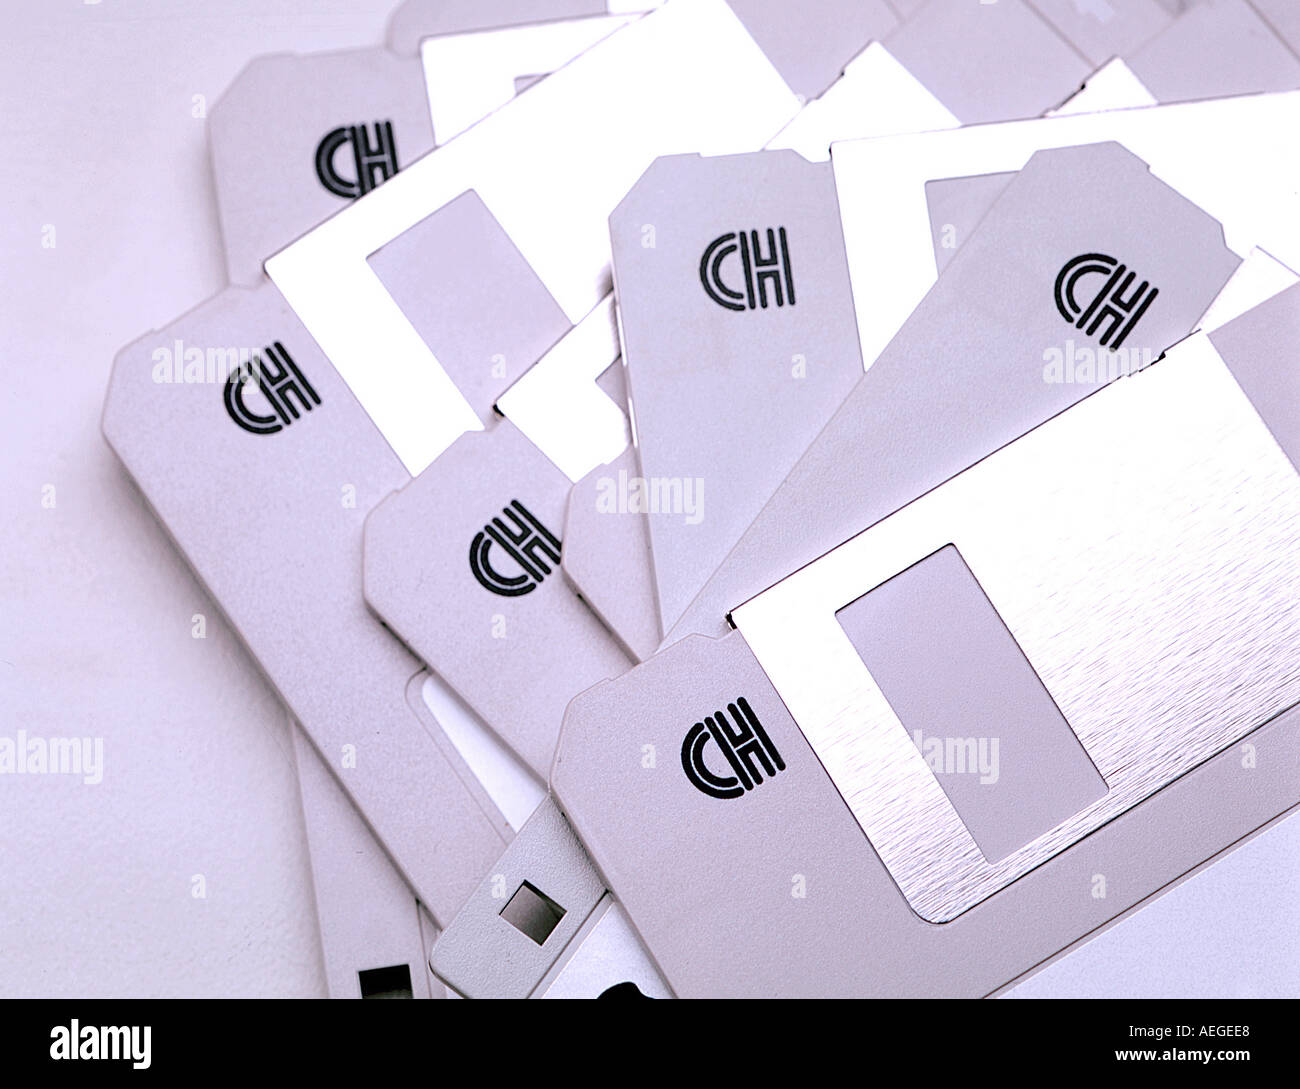 Office disk disks floppy drive media high density 3 1 4 diskette storage computer white stationery technology concept miscellane Stock Photo